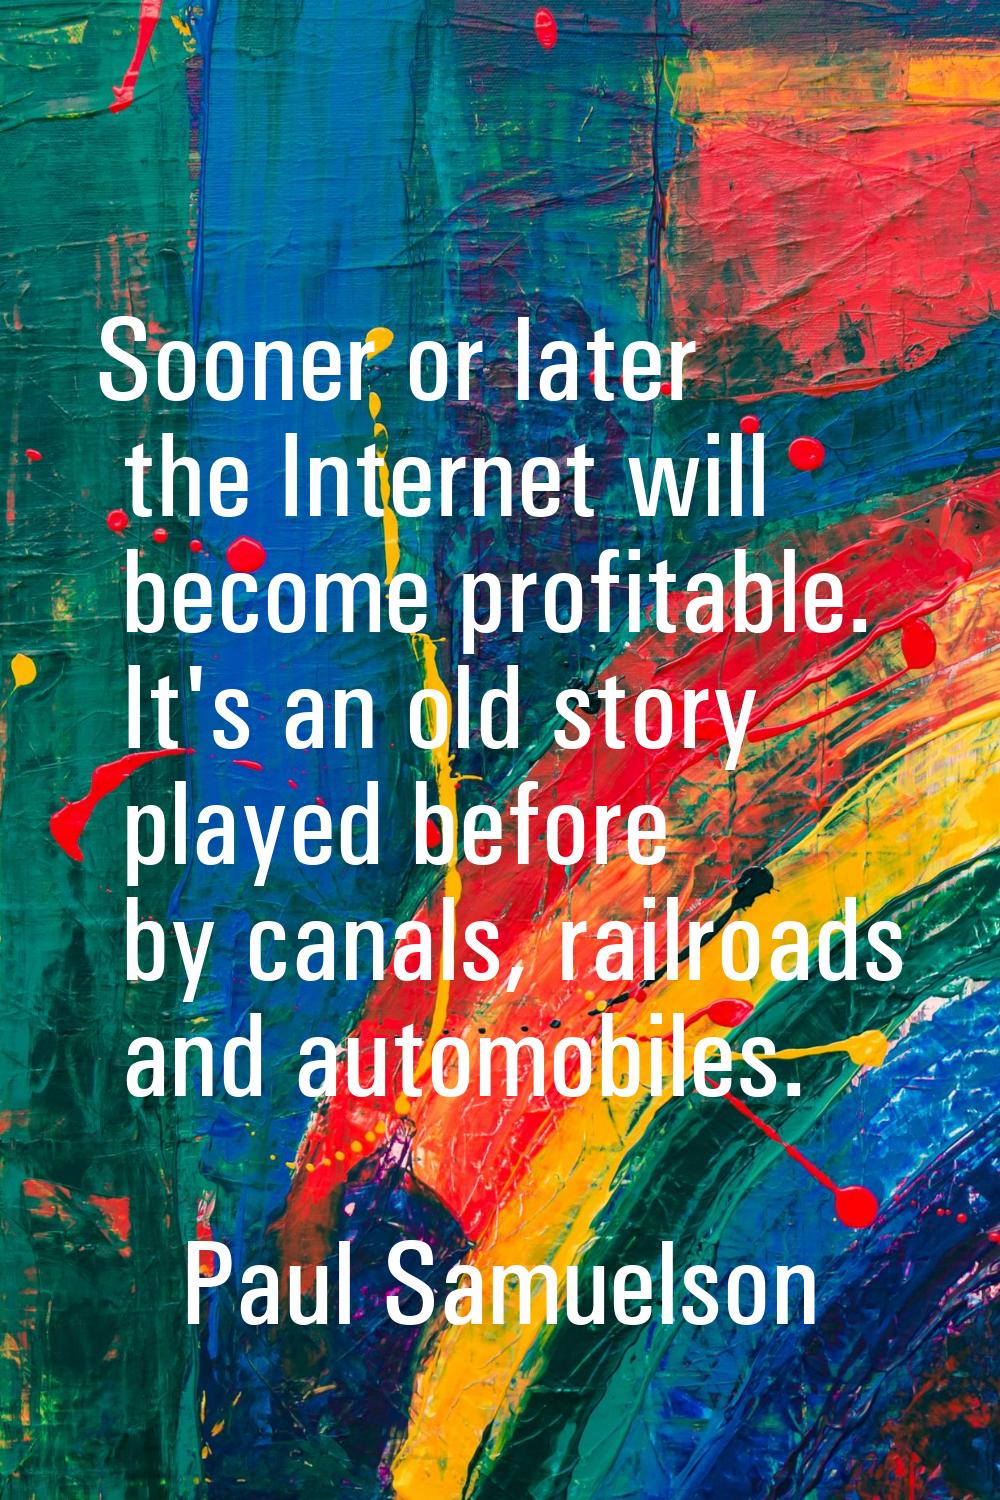 Sooner or later the Internet will become profitable. It's an old story played before by canals, rai